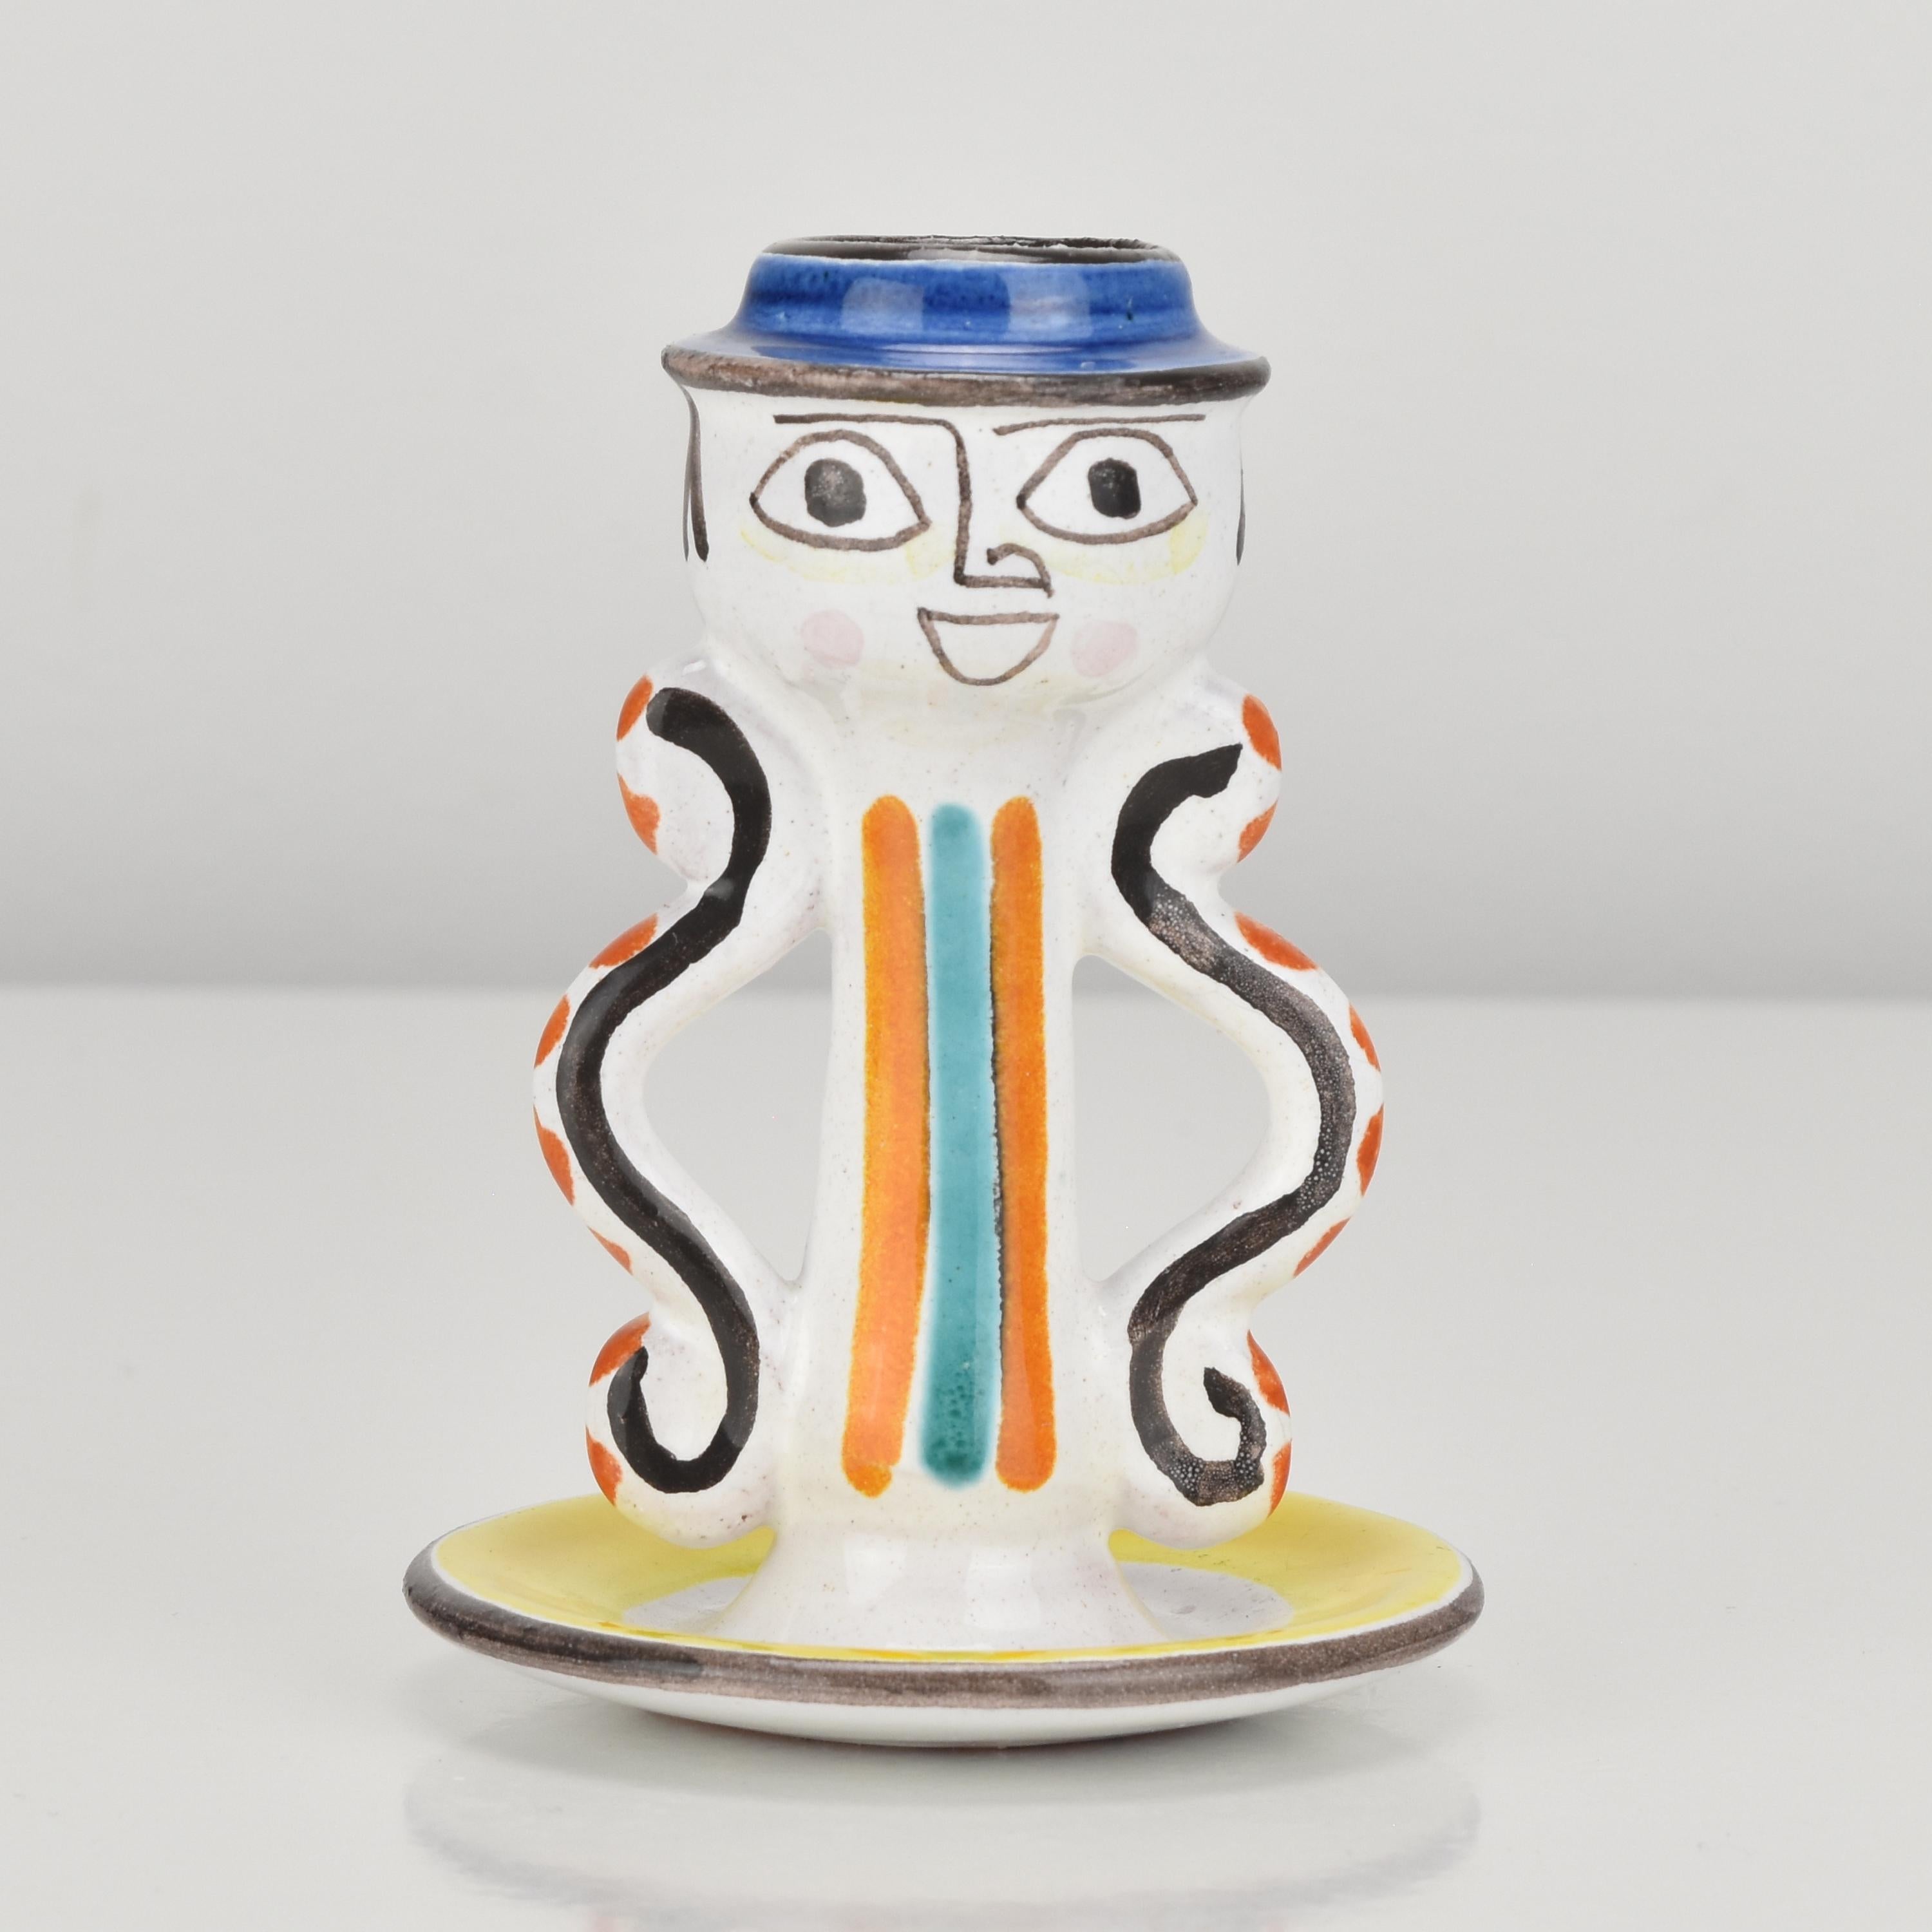 This vintage figural candlestick by Giovanni Desimone Italy is a unique and eye-catching piece of decorative art. DeSimone was a renowned Italian ceramicist and designer who worked in the mid-20th century, known for his whimsical and colorful